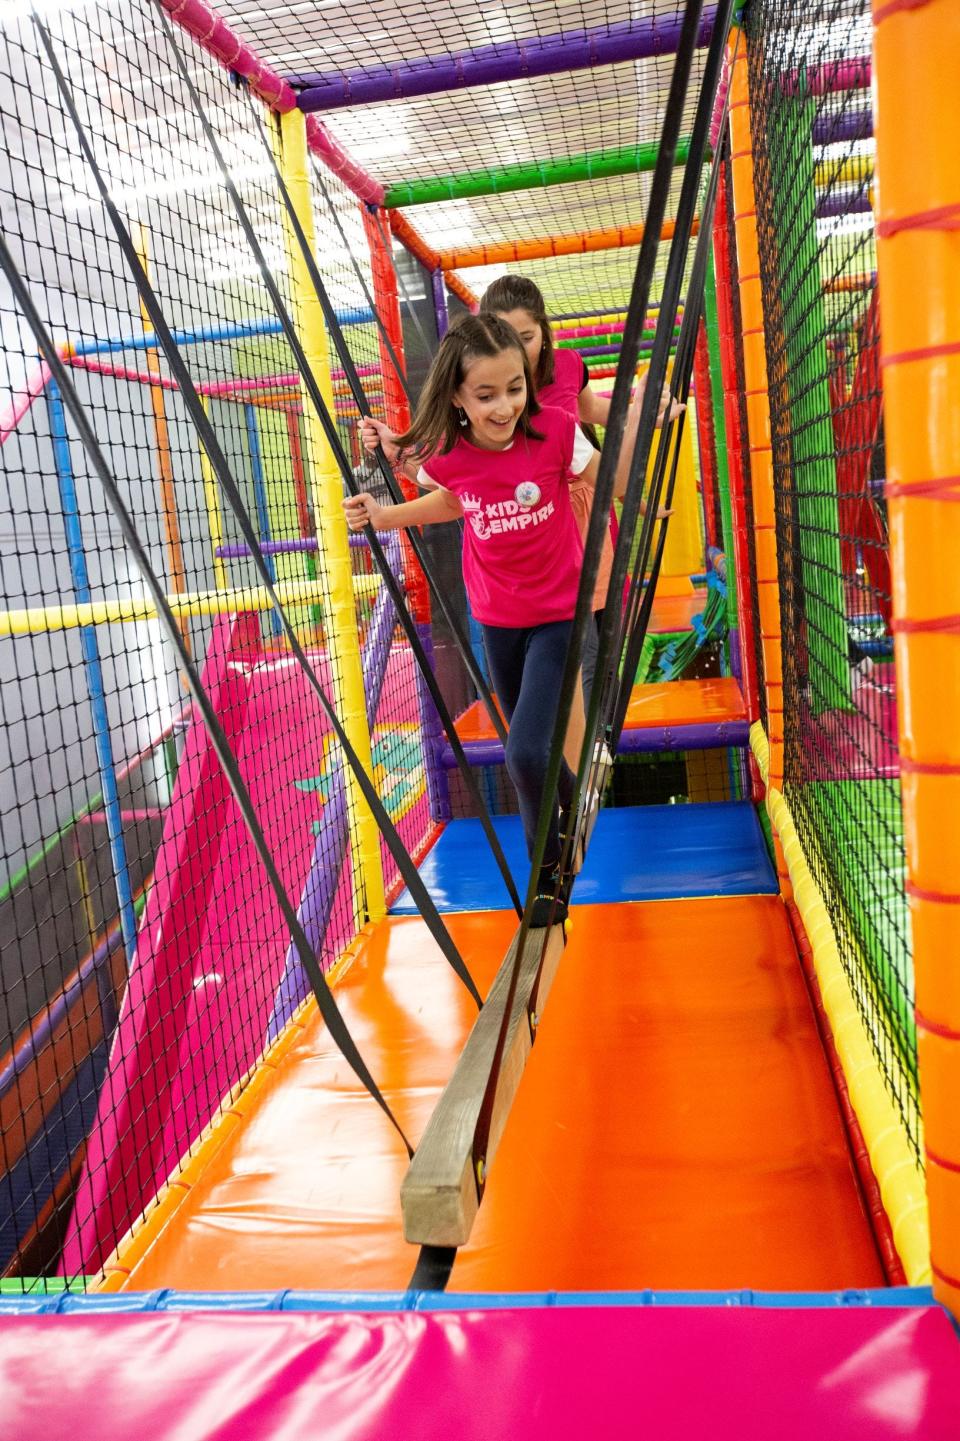 Climbing, balancing and bouncing activities are among play area features at Kids Empire.